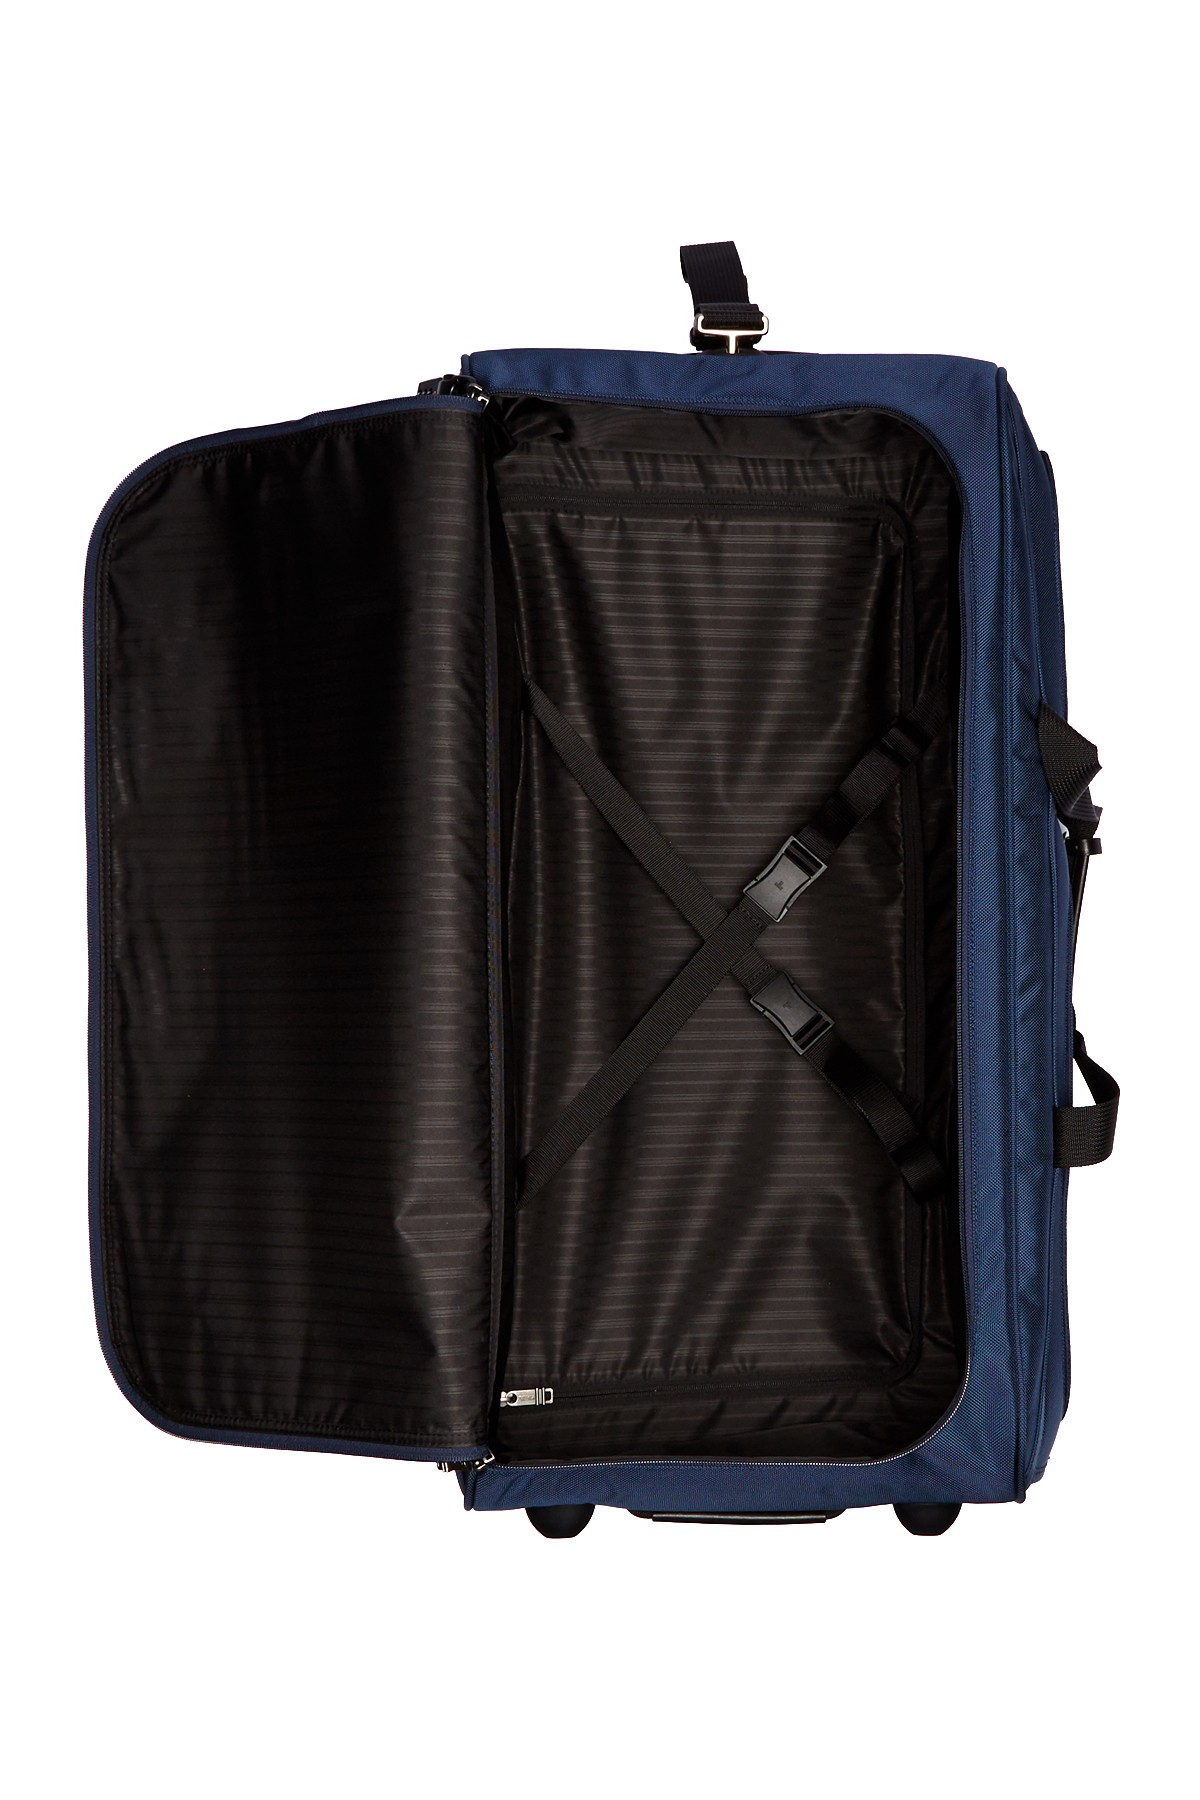 Lyst - Tumi Nylon Large 30&quot; Wheeled Duffle Bag in Blue for Men